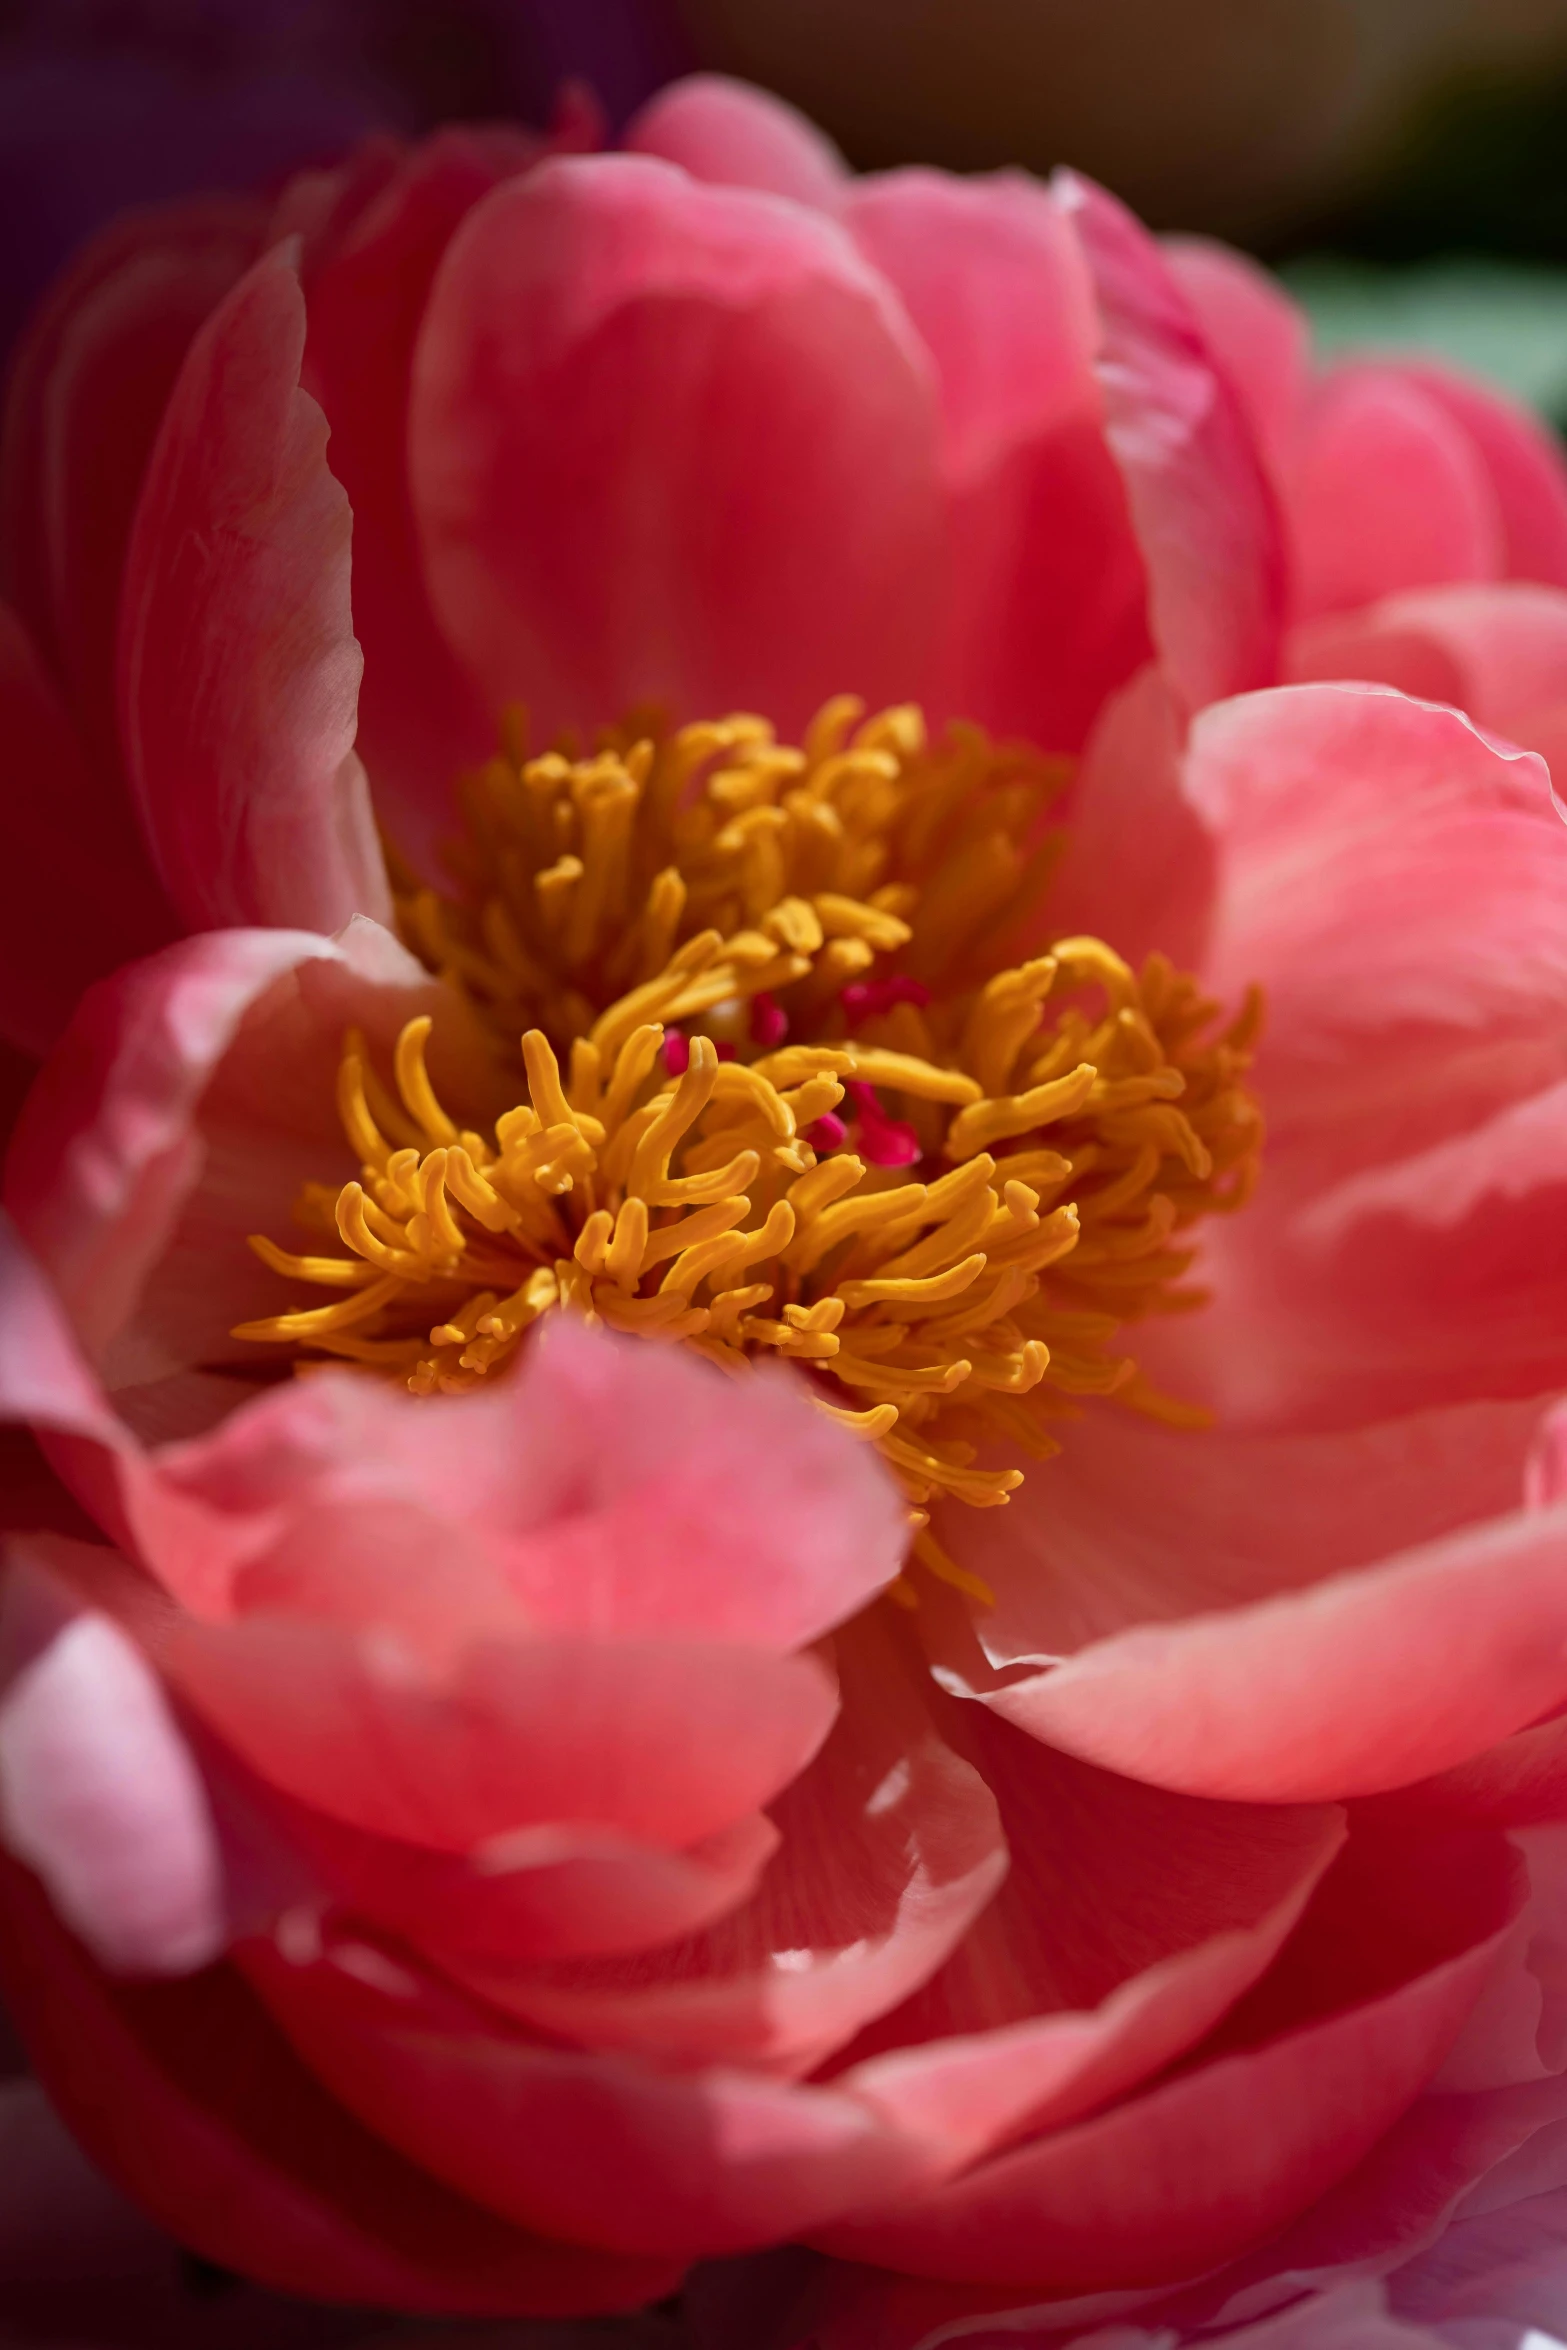 a close up of a pink flower on a table, inspired by Li Di, baroque, peony, faded red and yelow, growing, vibrant foliage